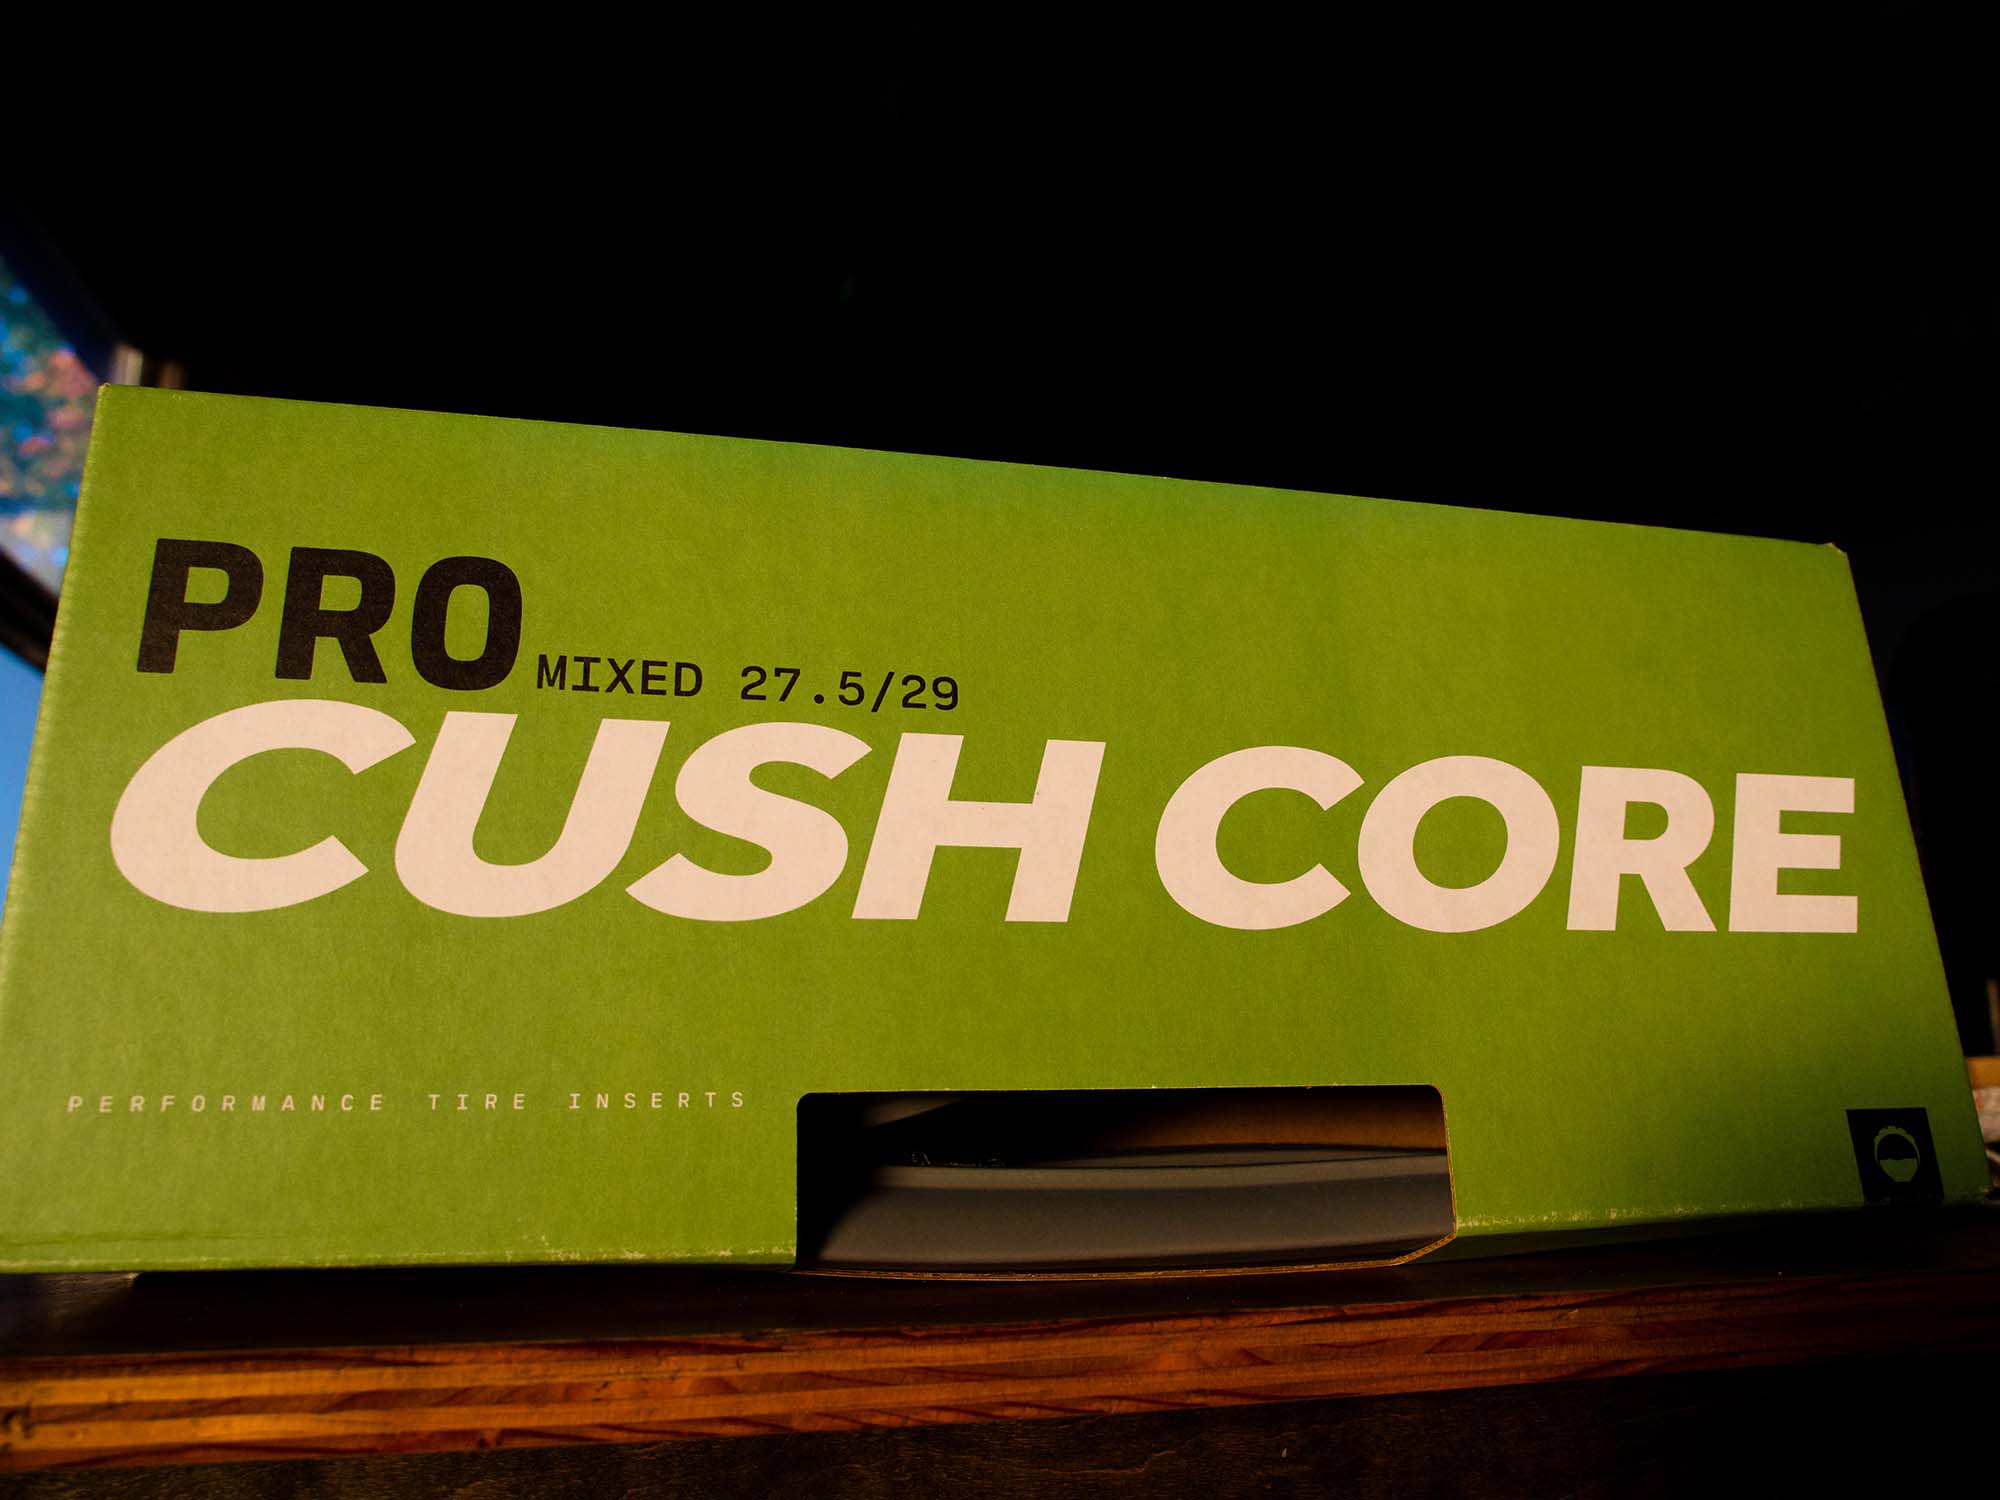 Cushcore - a simple product can make such a profound impact on ride quality